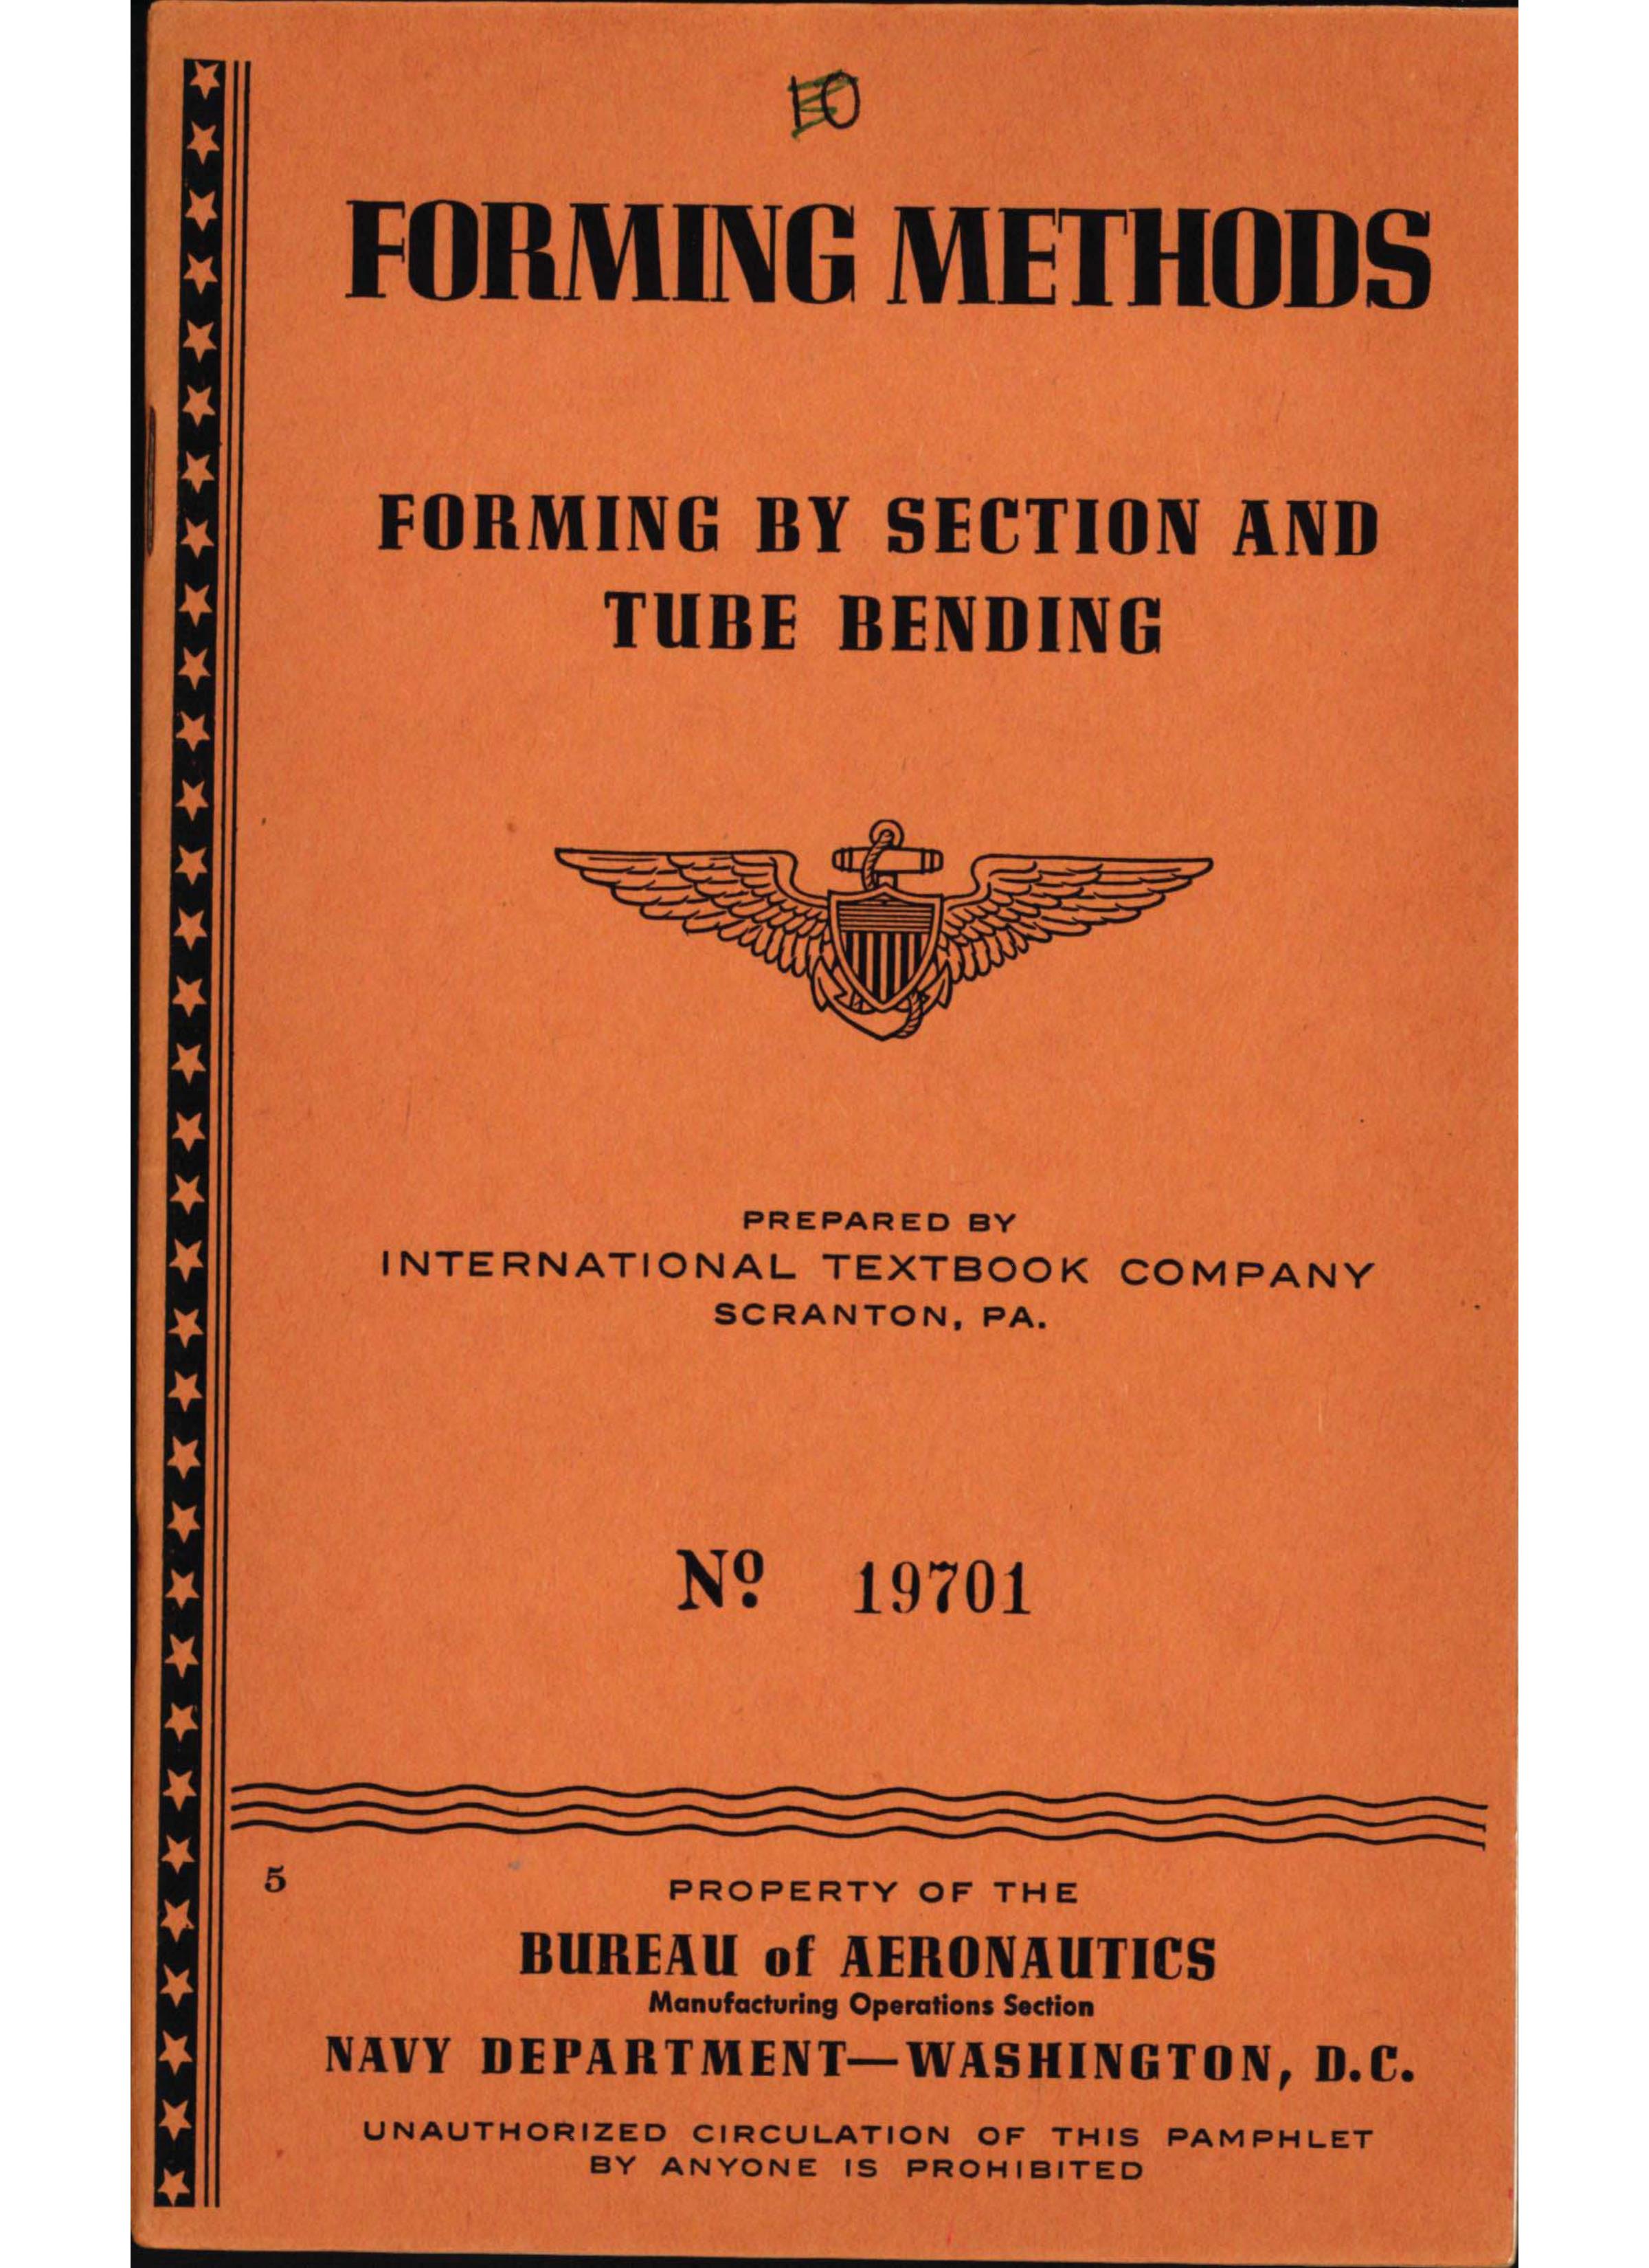 Sample page 1 from AirCorps Library document: Forming Methods - Forming by Section & Tube Bending - Bureau of Aeronautics